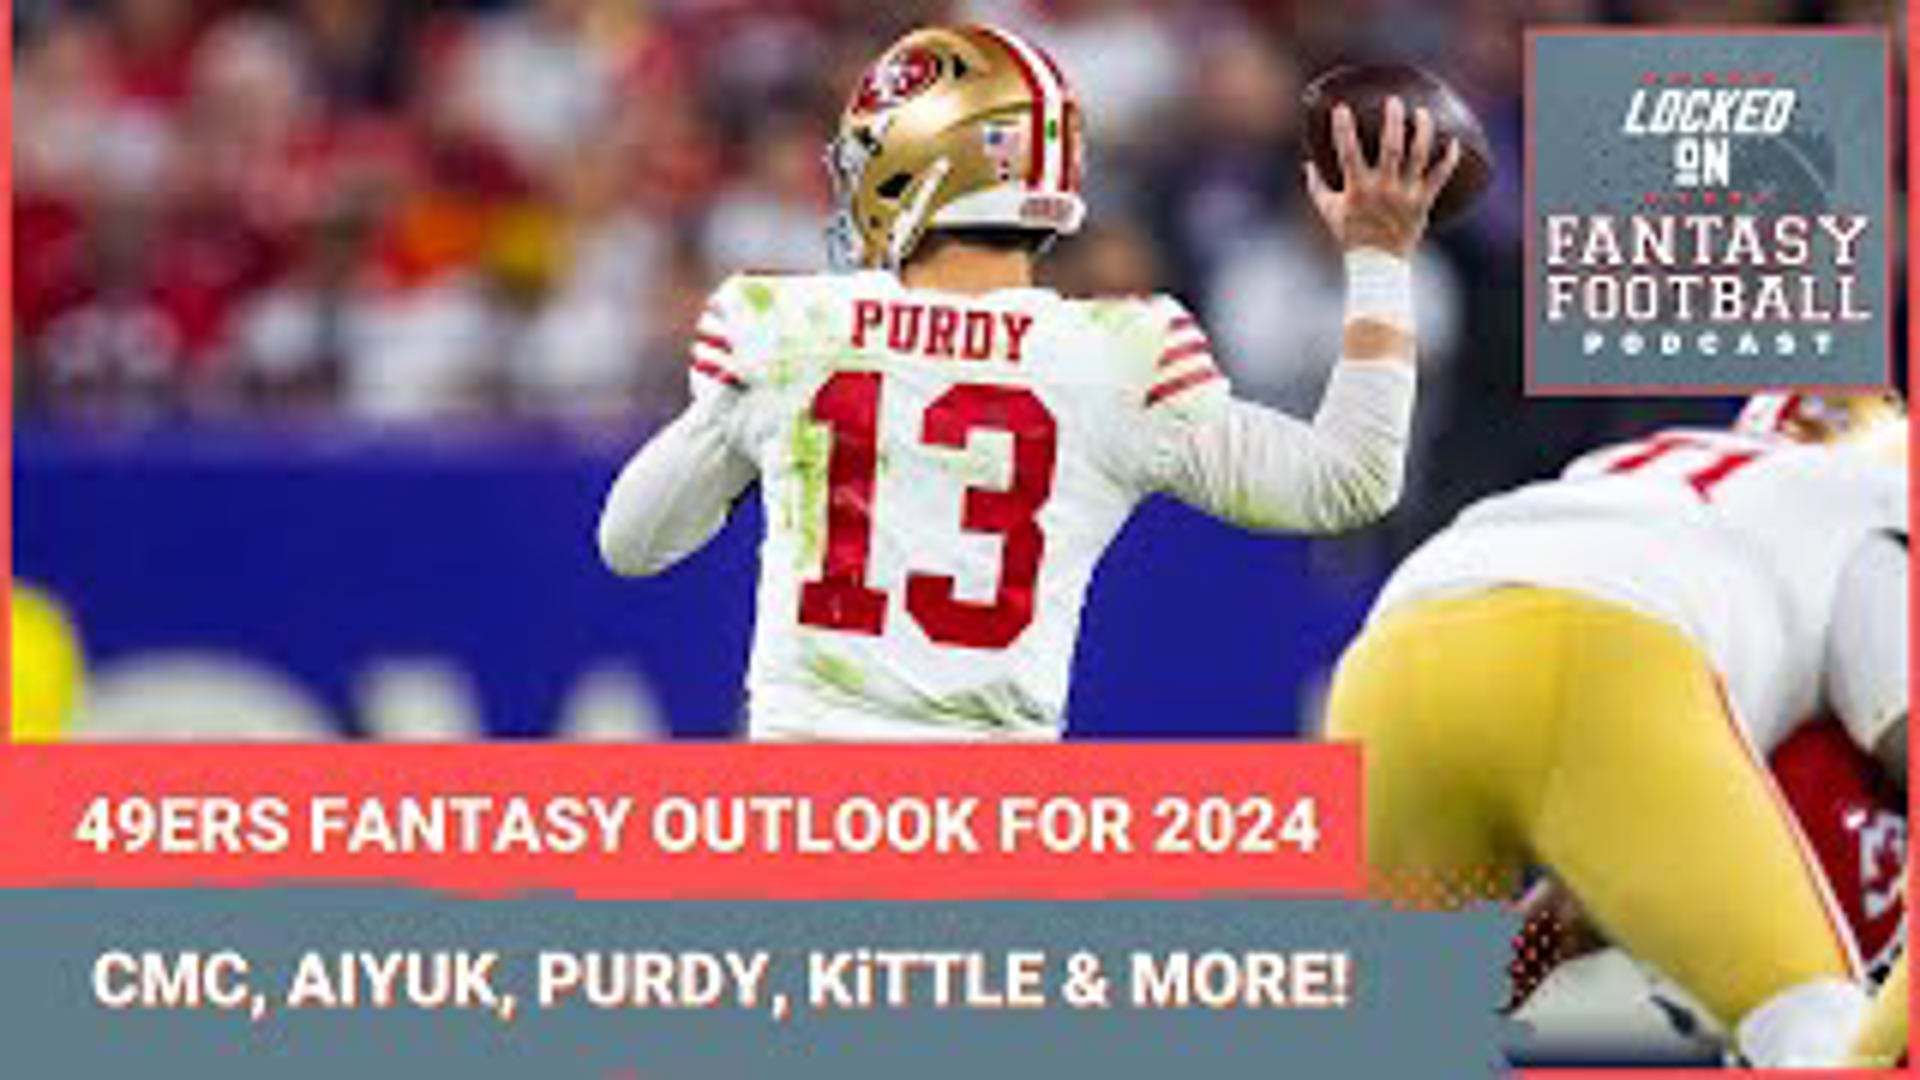 Sporting News.com's Vinnie Iyer and NFL.com's Michelle Magdziuk break down the fantasy football potential of the 2024 San Francisco 49ers.